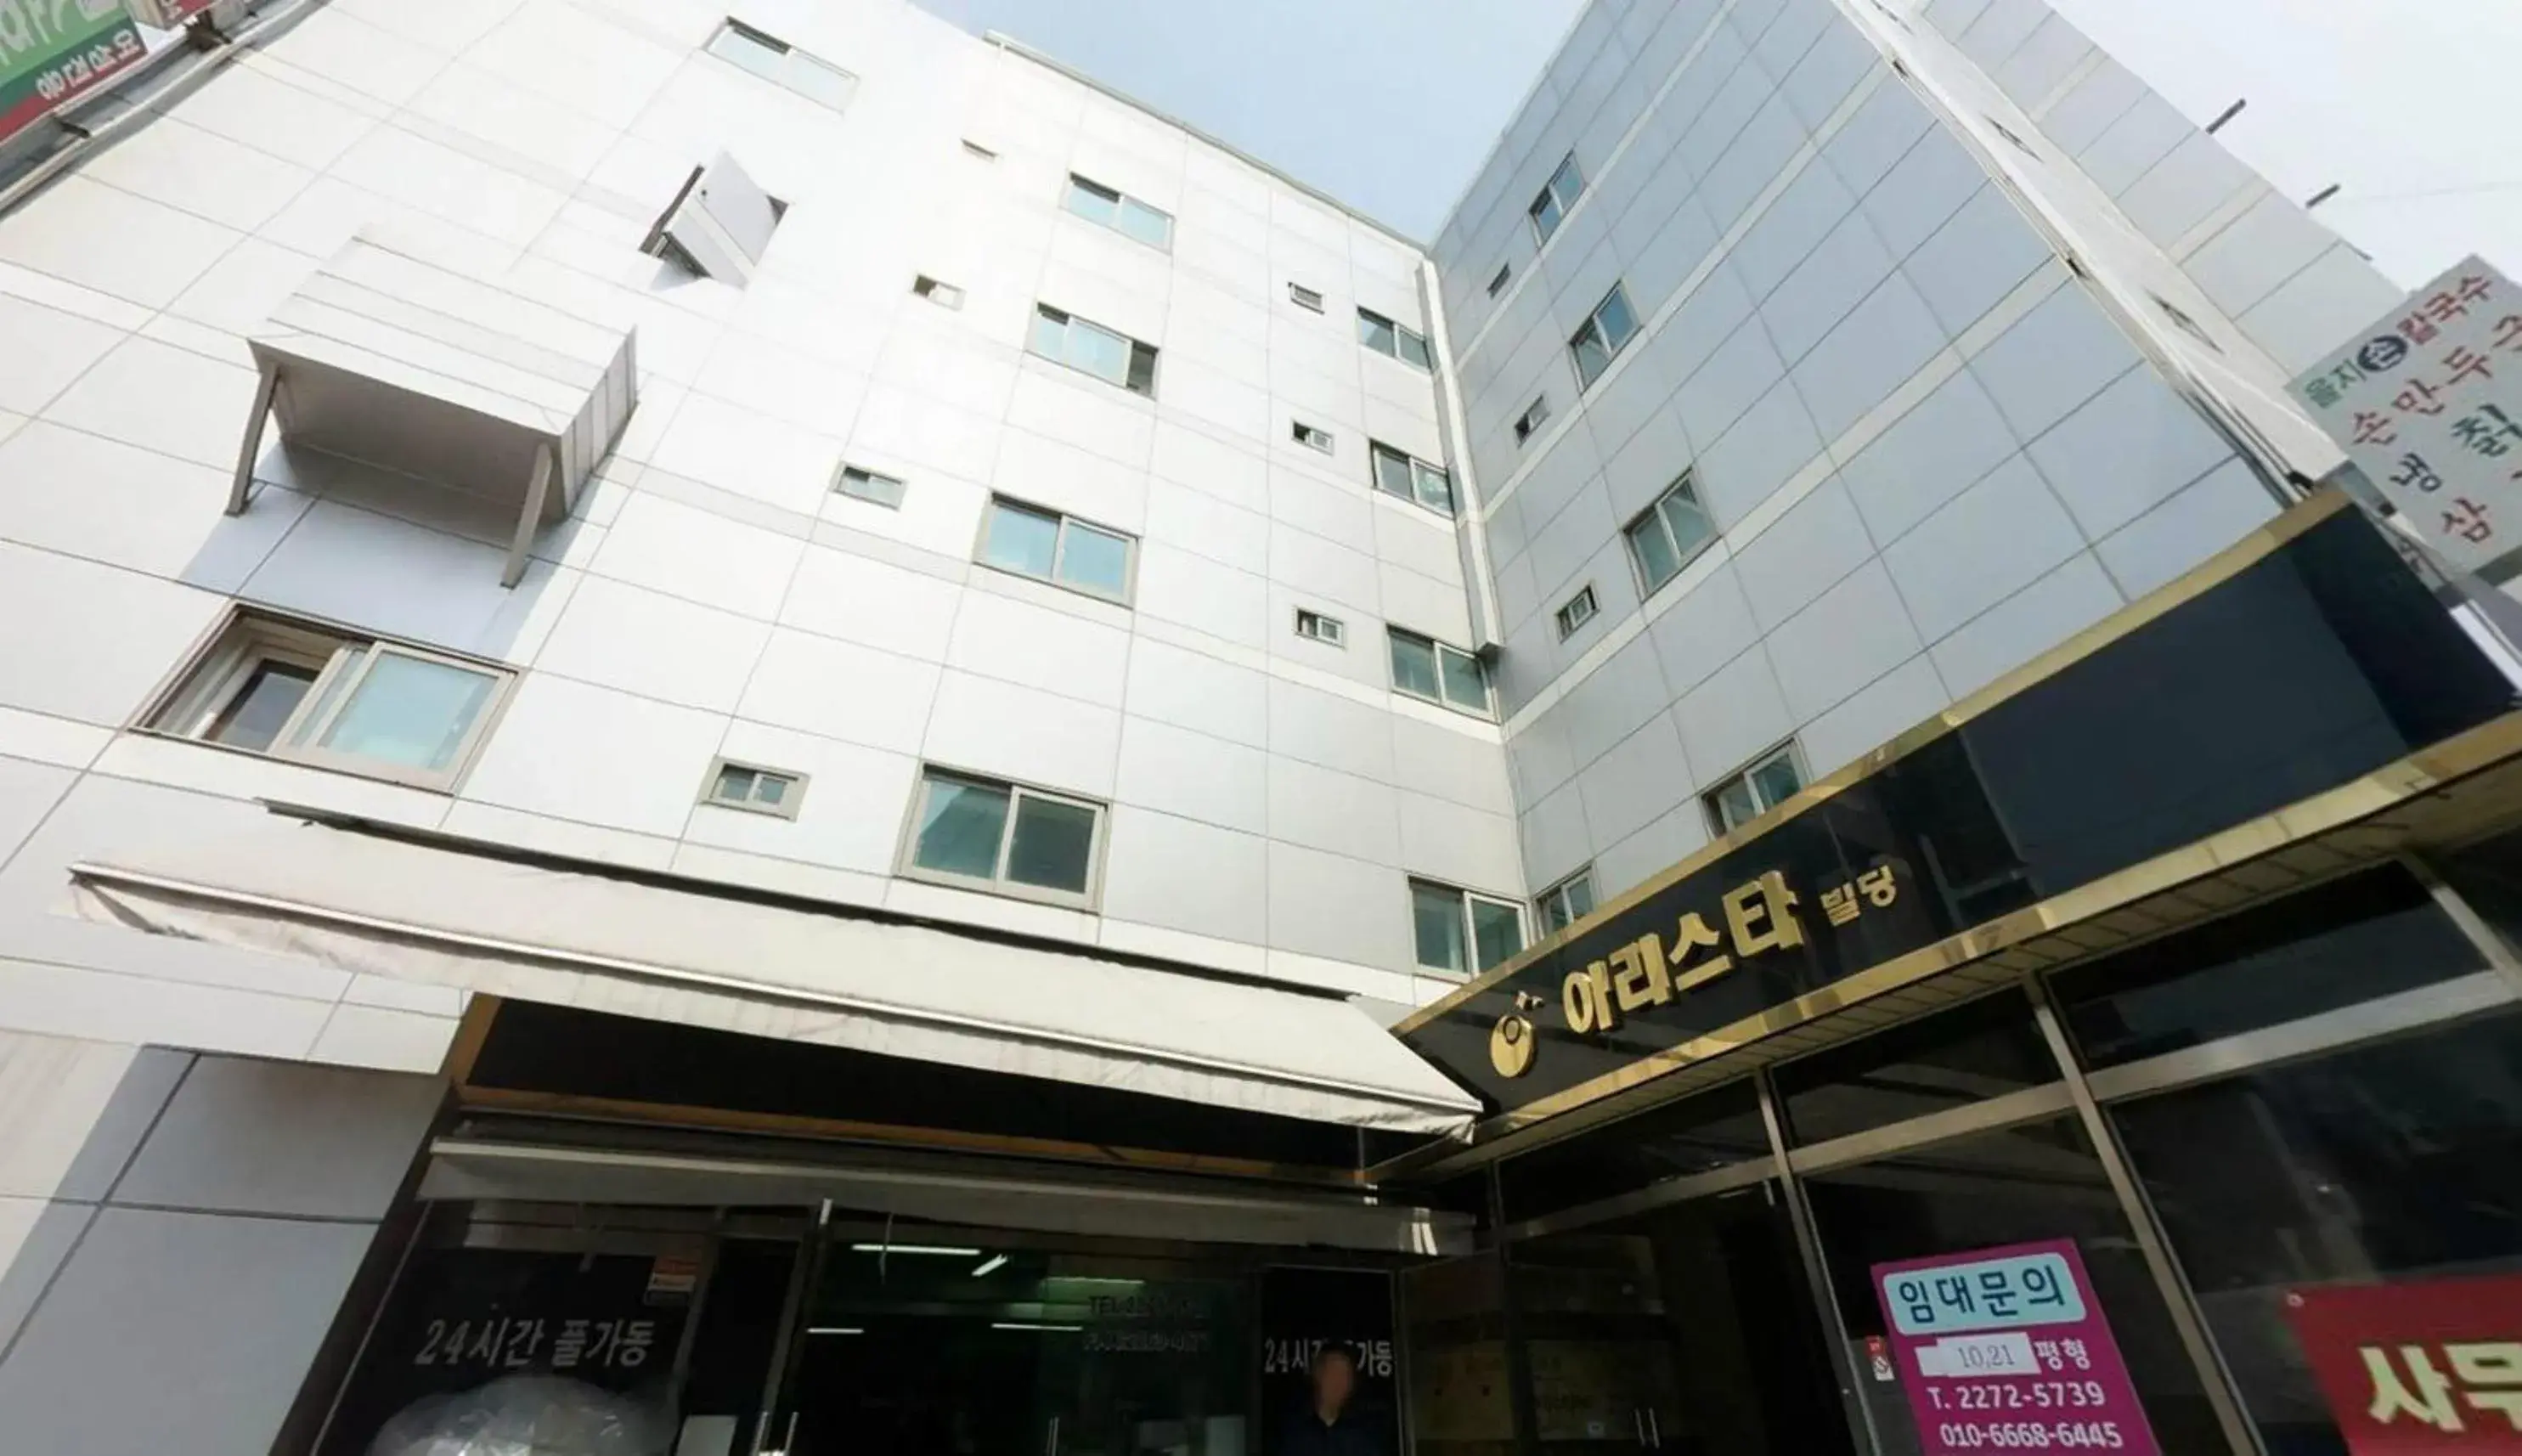 Facade/entrance, Property Building in TRIPSTAY Myeongdong